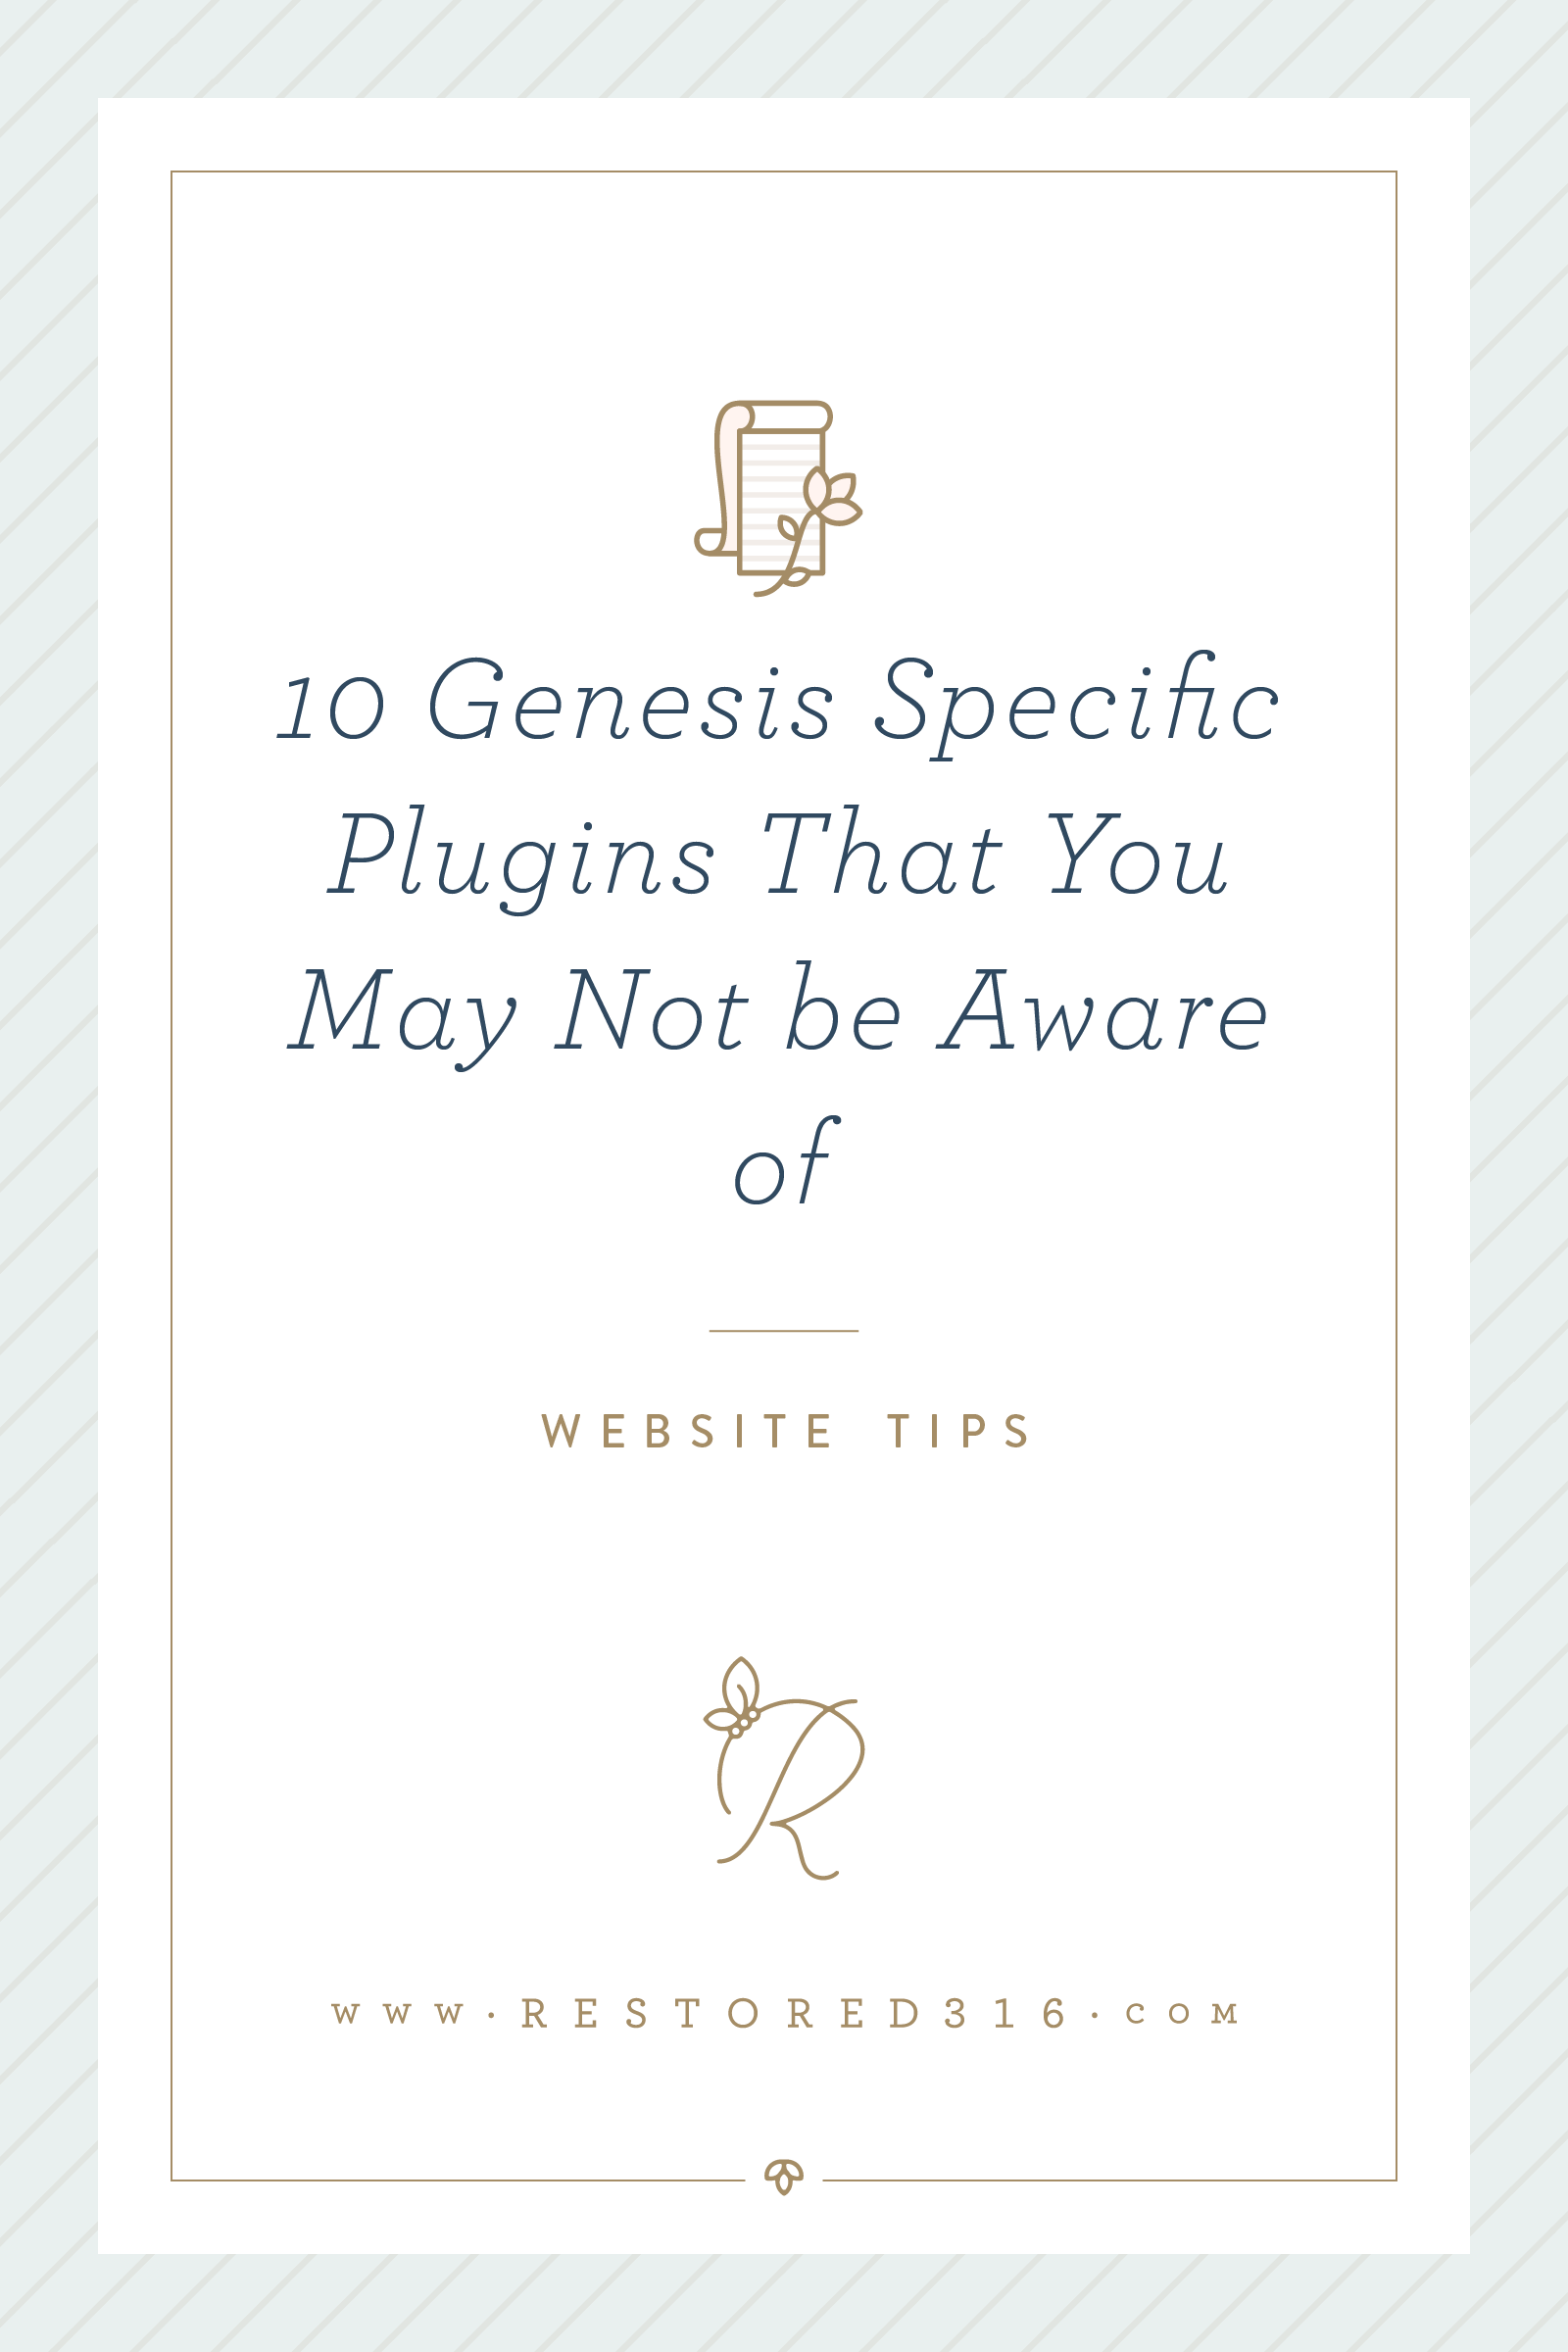 10-geneis-specific-plugins-that-you-may-not-be-aware-of